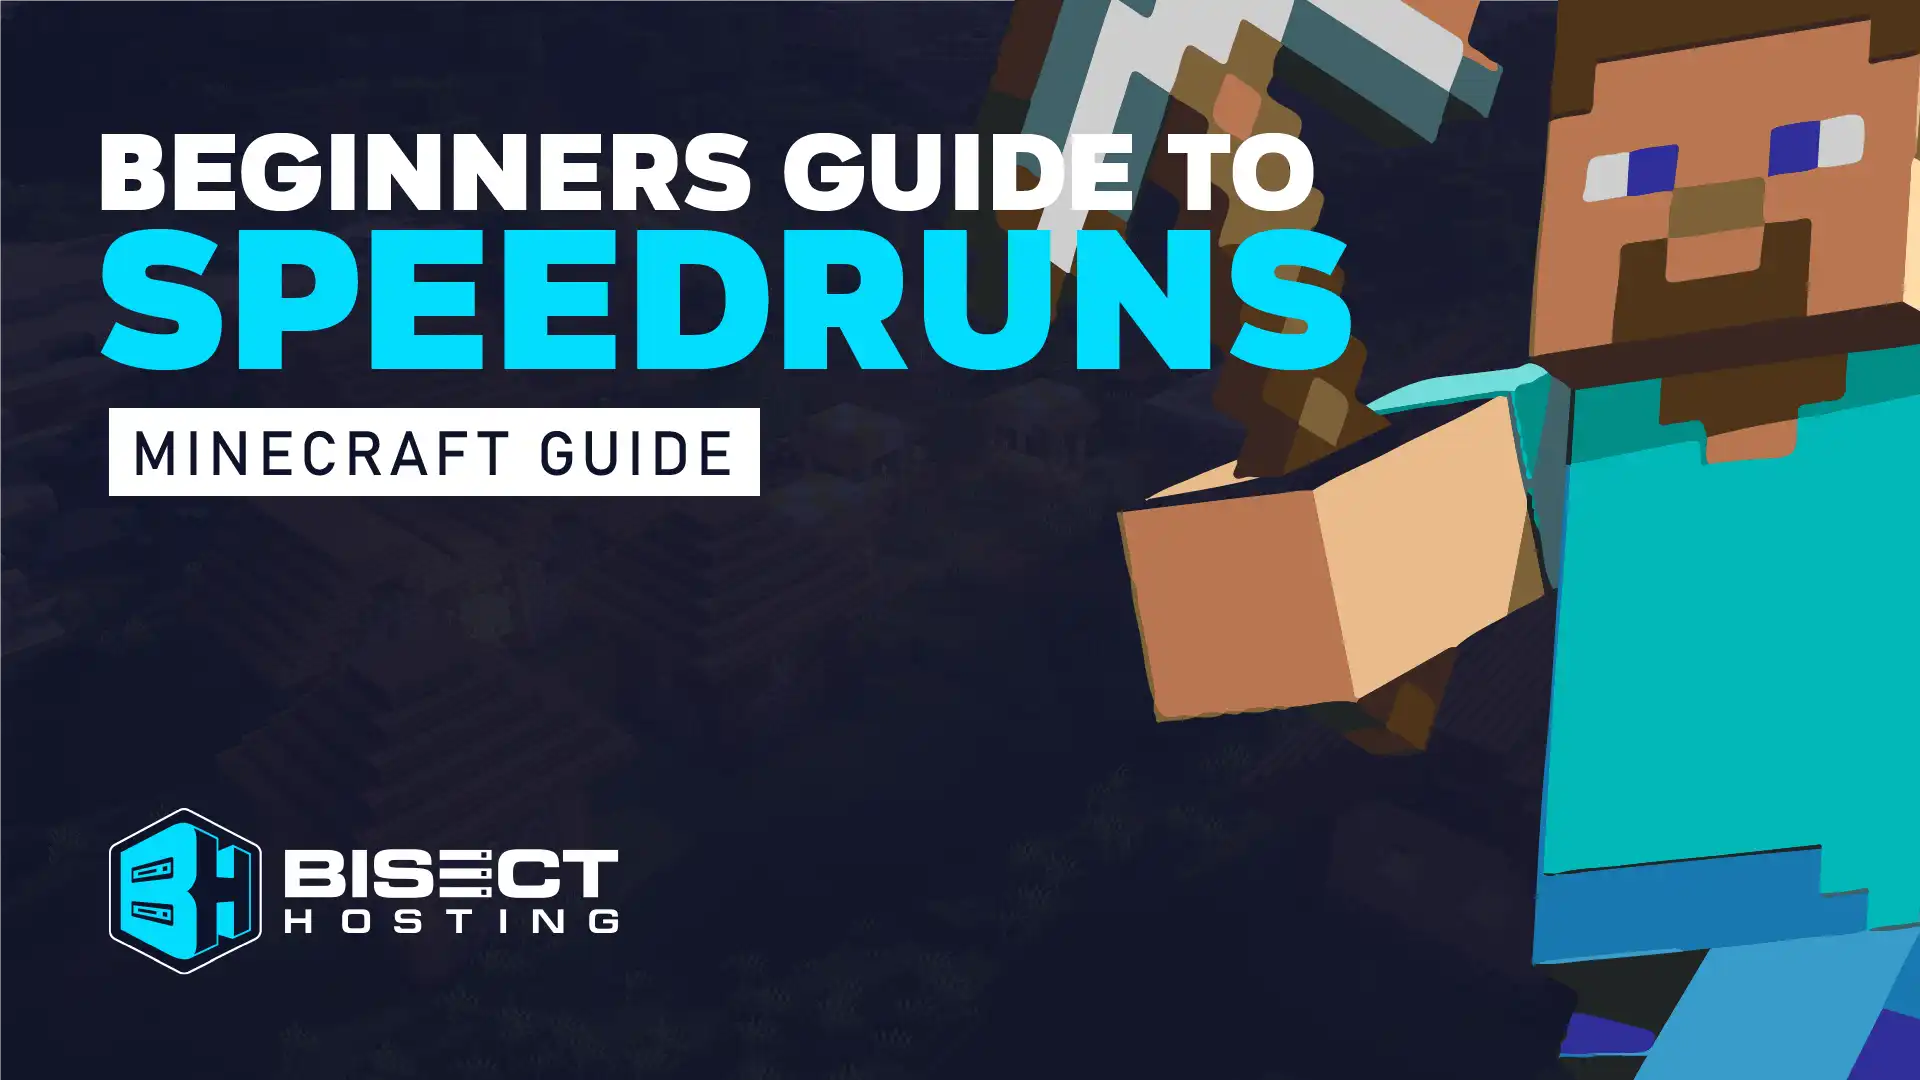 How To Speedrun  The Ultimate Guide to Speedrunning Part 1